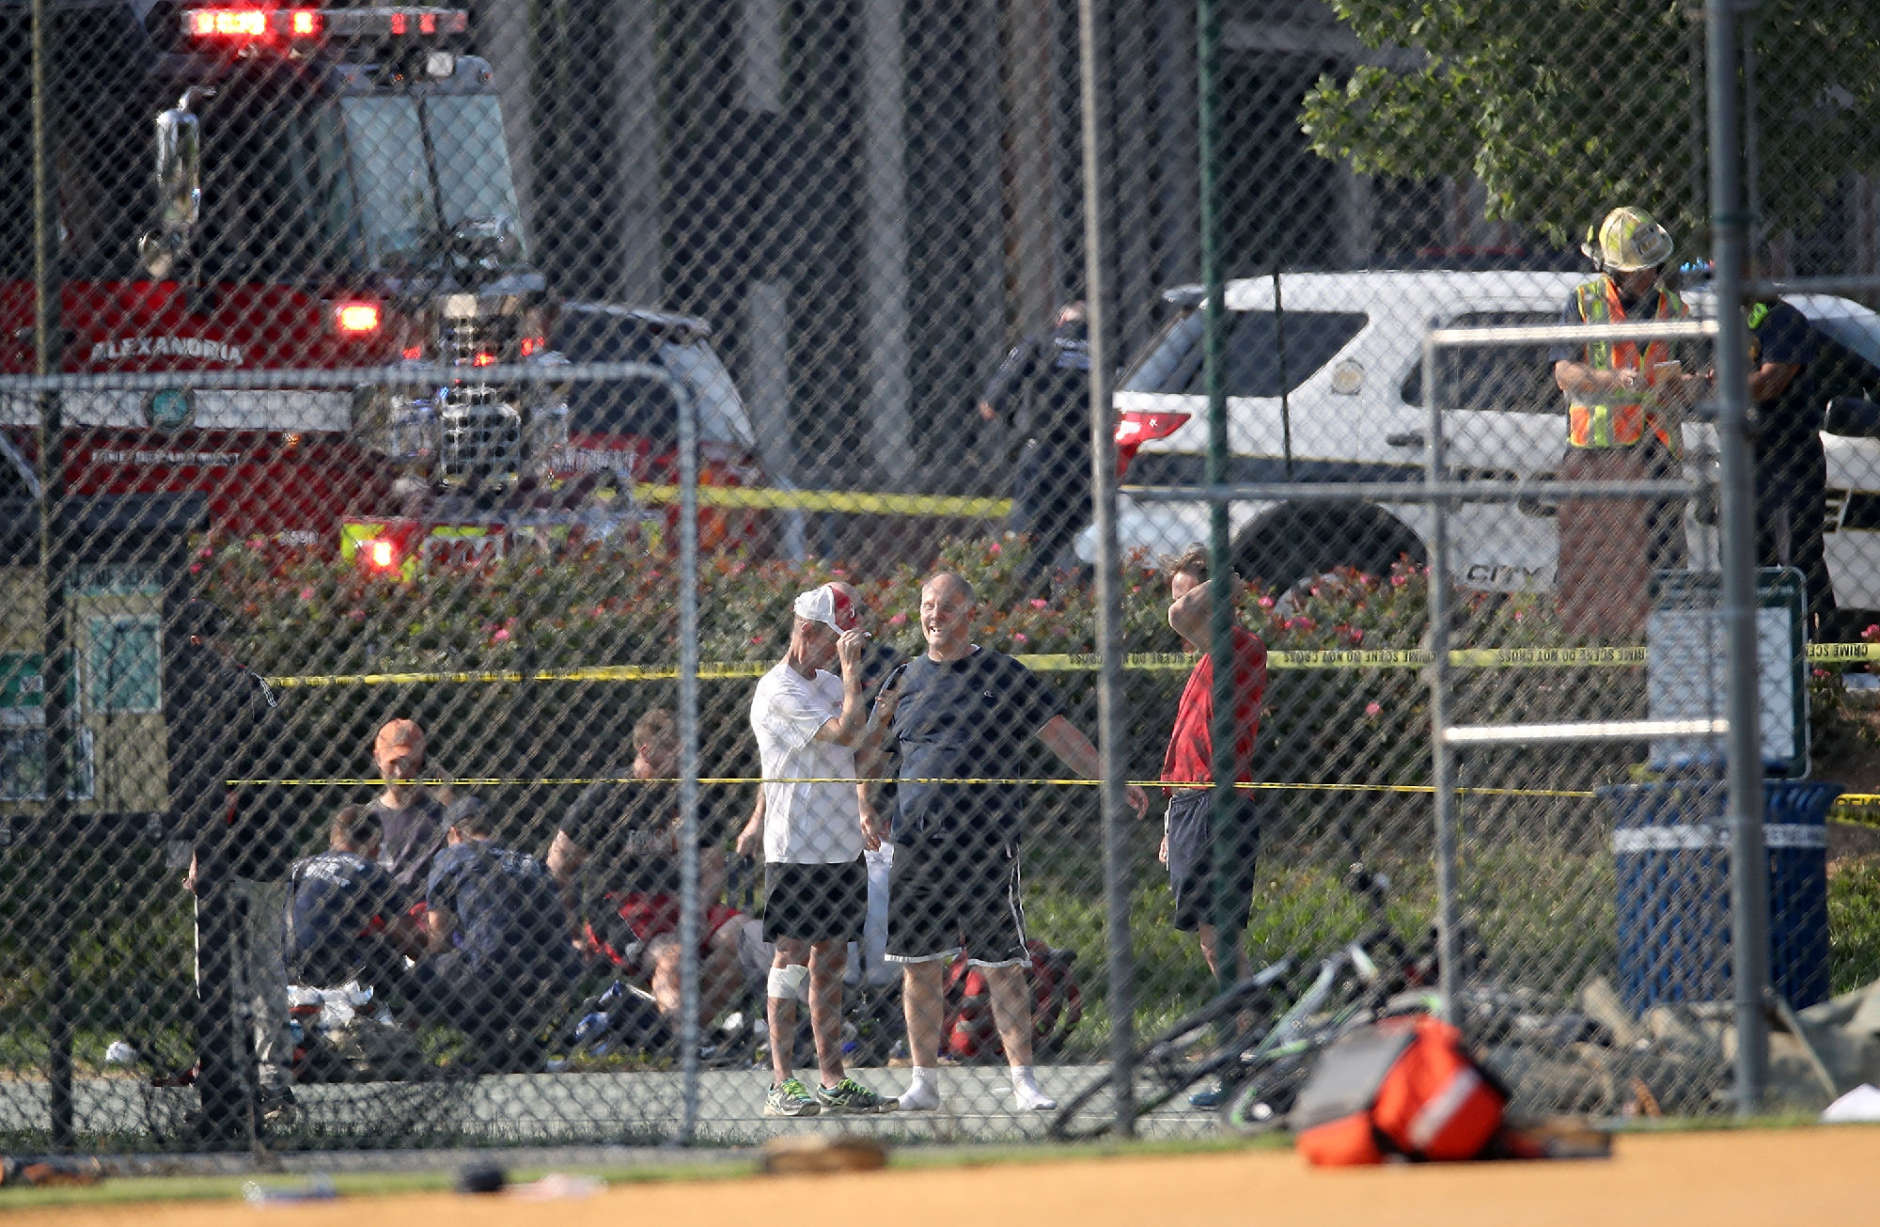 ALEXANDRIA, VA - JUNE 14: Investigators and men dressed in baseball gear gather at Eugene Simpson Field, the site where a gunman opened fire June 14, 2017 in Alexandria, Virginia. Multiple injuries were reported from the instance, the site where a congressional baseball team was holding an early morning practice, including House Republican Whip Steve Scalise (R-LA) who was reportedly shot in the hip. (Photo by Win McNamee/Getty Images)